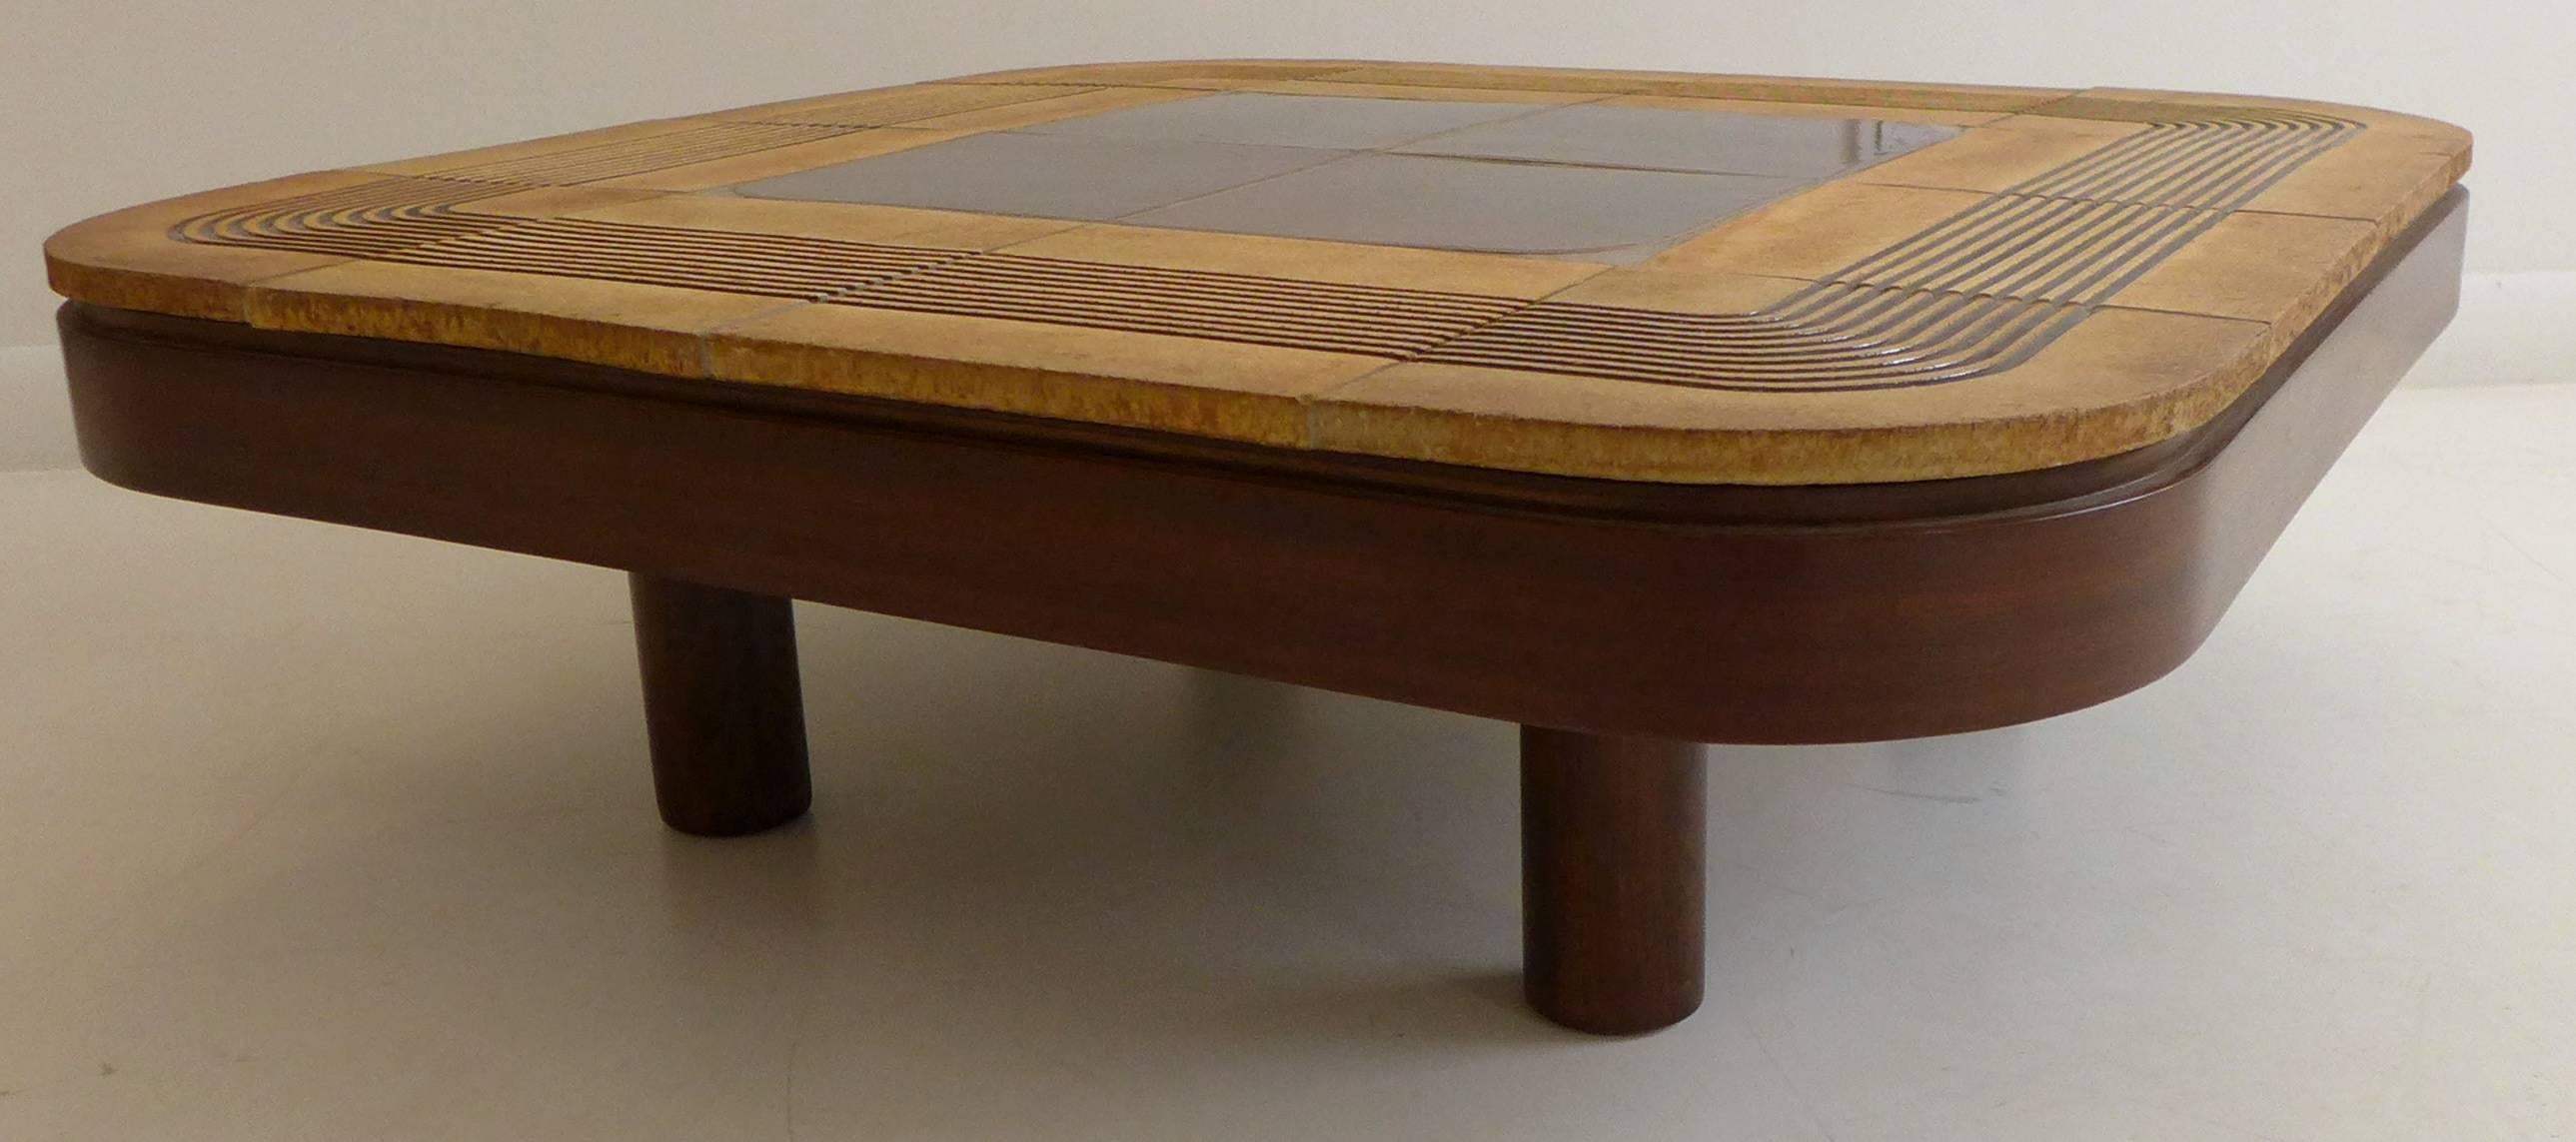 Ceramic tile cocktail table with rounded edges, in wooden frame, by French artist/designer Roger Capron. Executed, circa 1970s. The tiles combine glazed and unglazed surfaces. In excellent original condition.